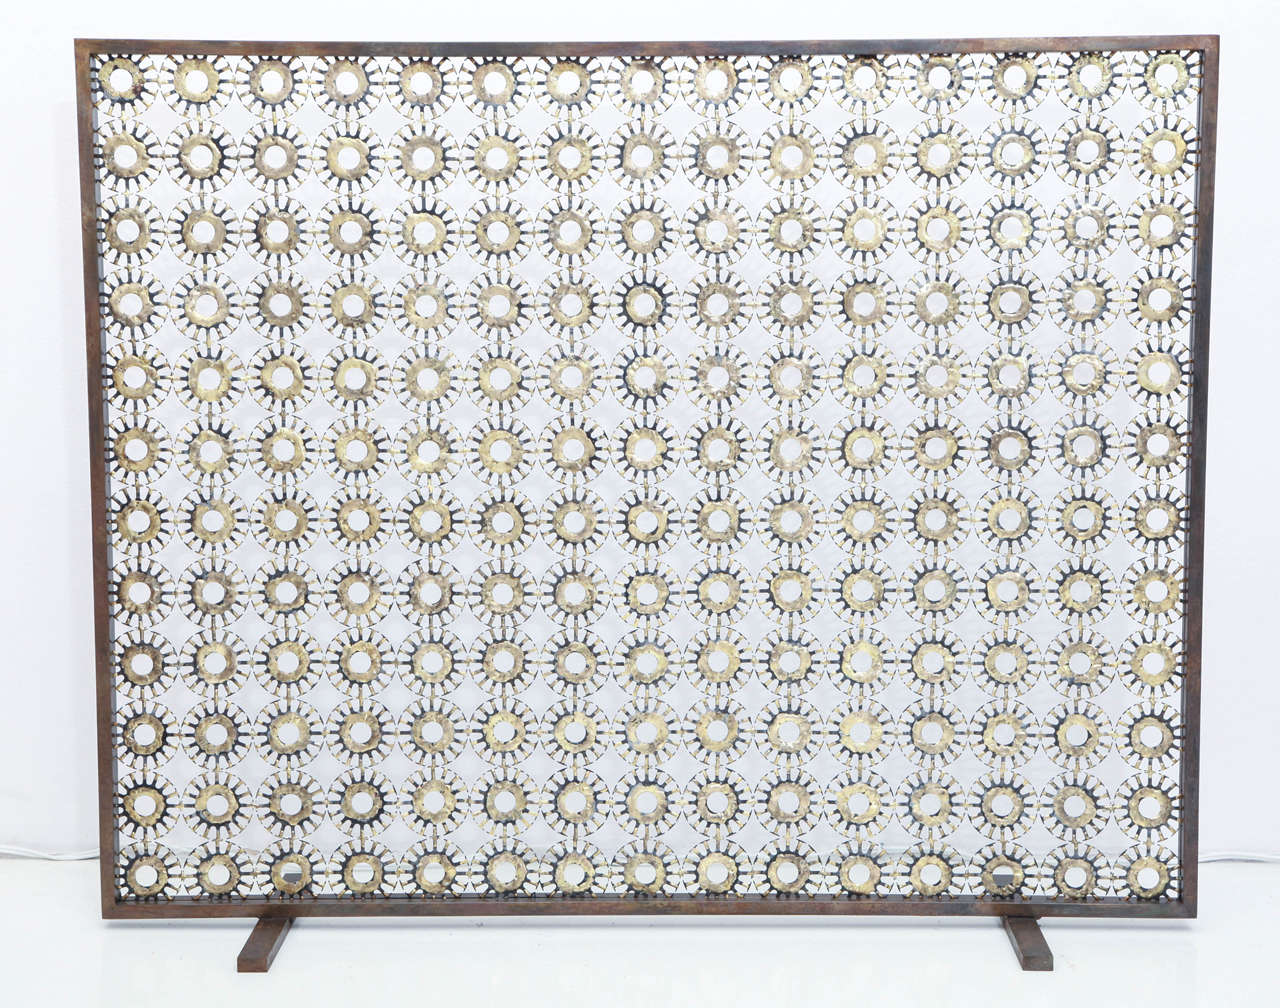 Marie Suri
The laurel fire screen fire screen with 2.5” steel medallions and bronze decoration. Custom inquiries welcome. Mesh backing available for wood-burning fireplaces.
Made to order expressly for Liz O'Brien.